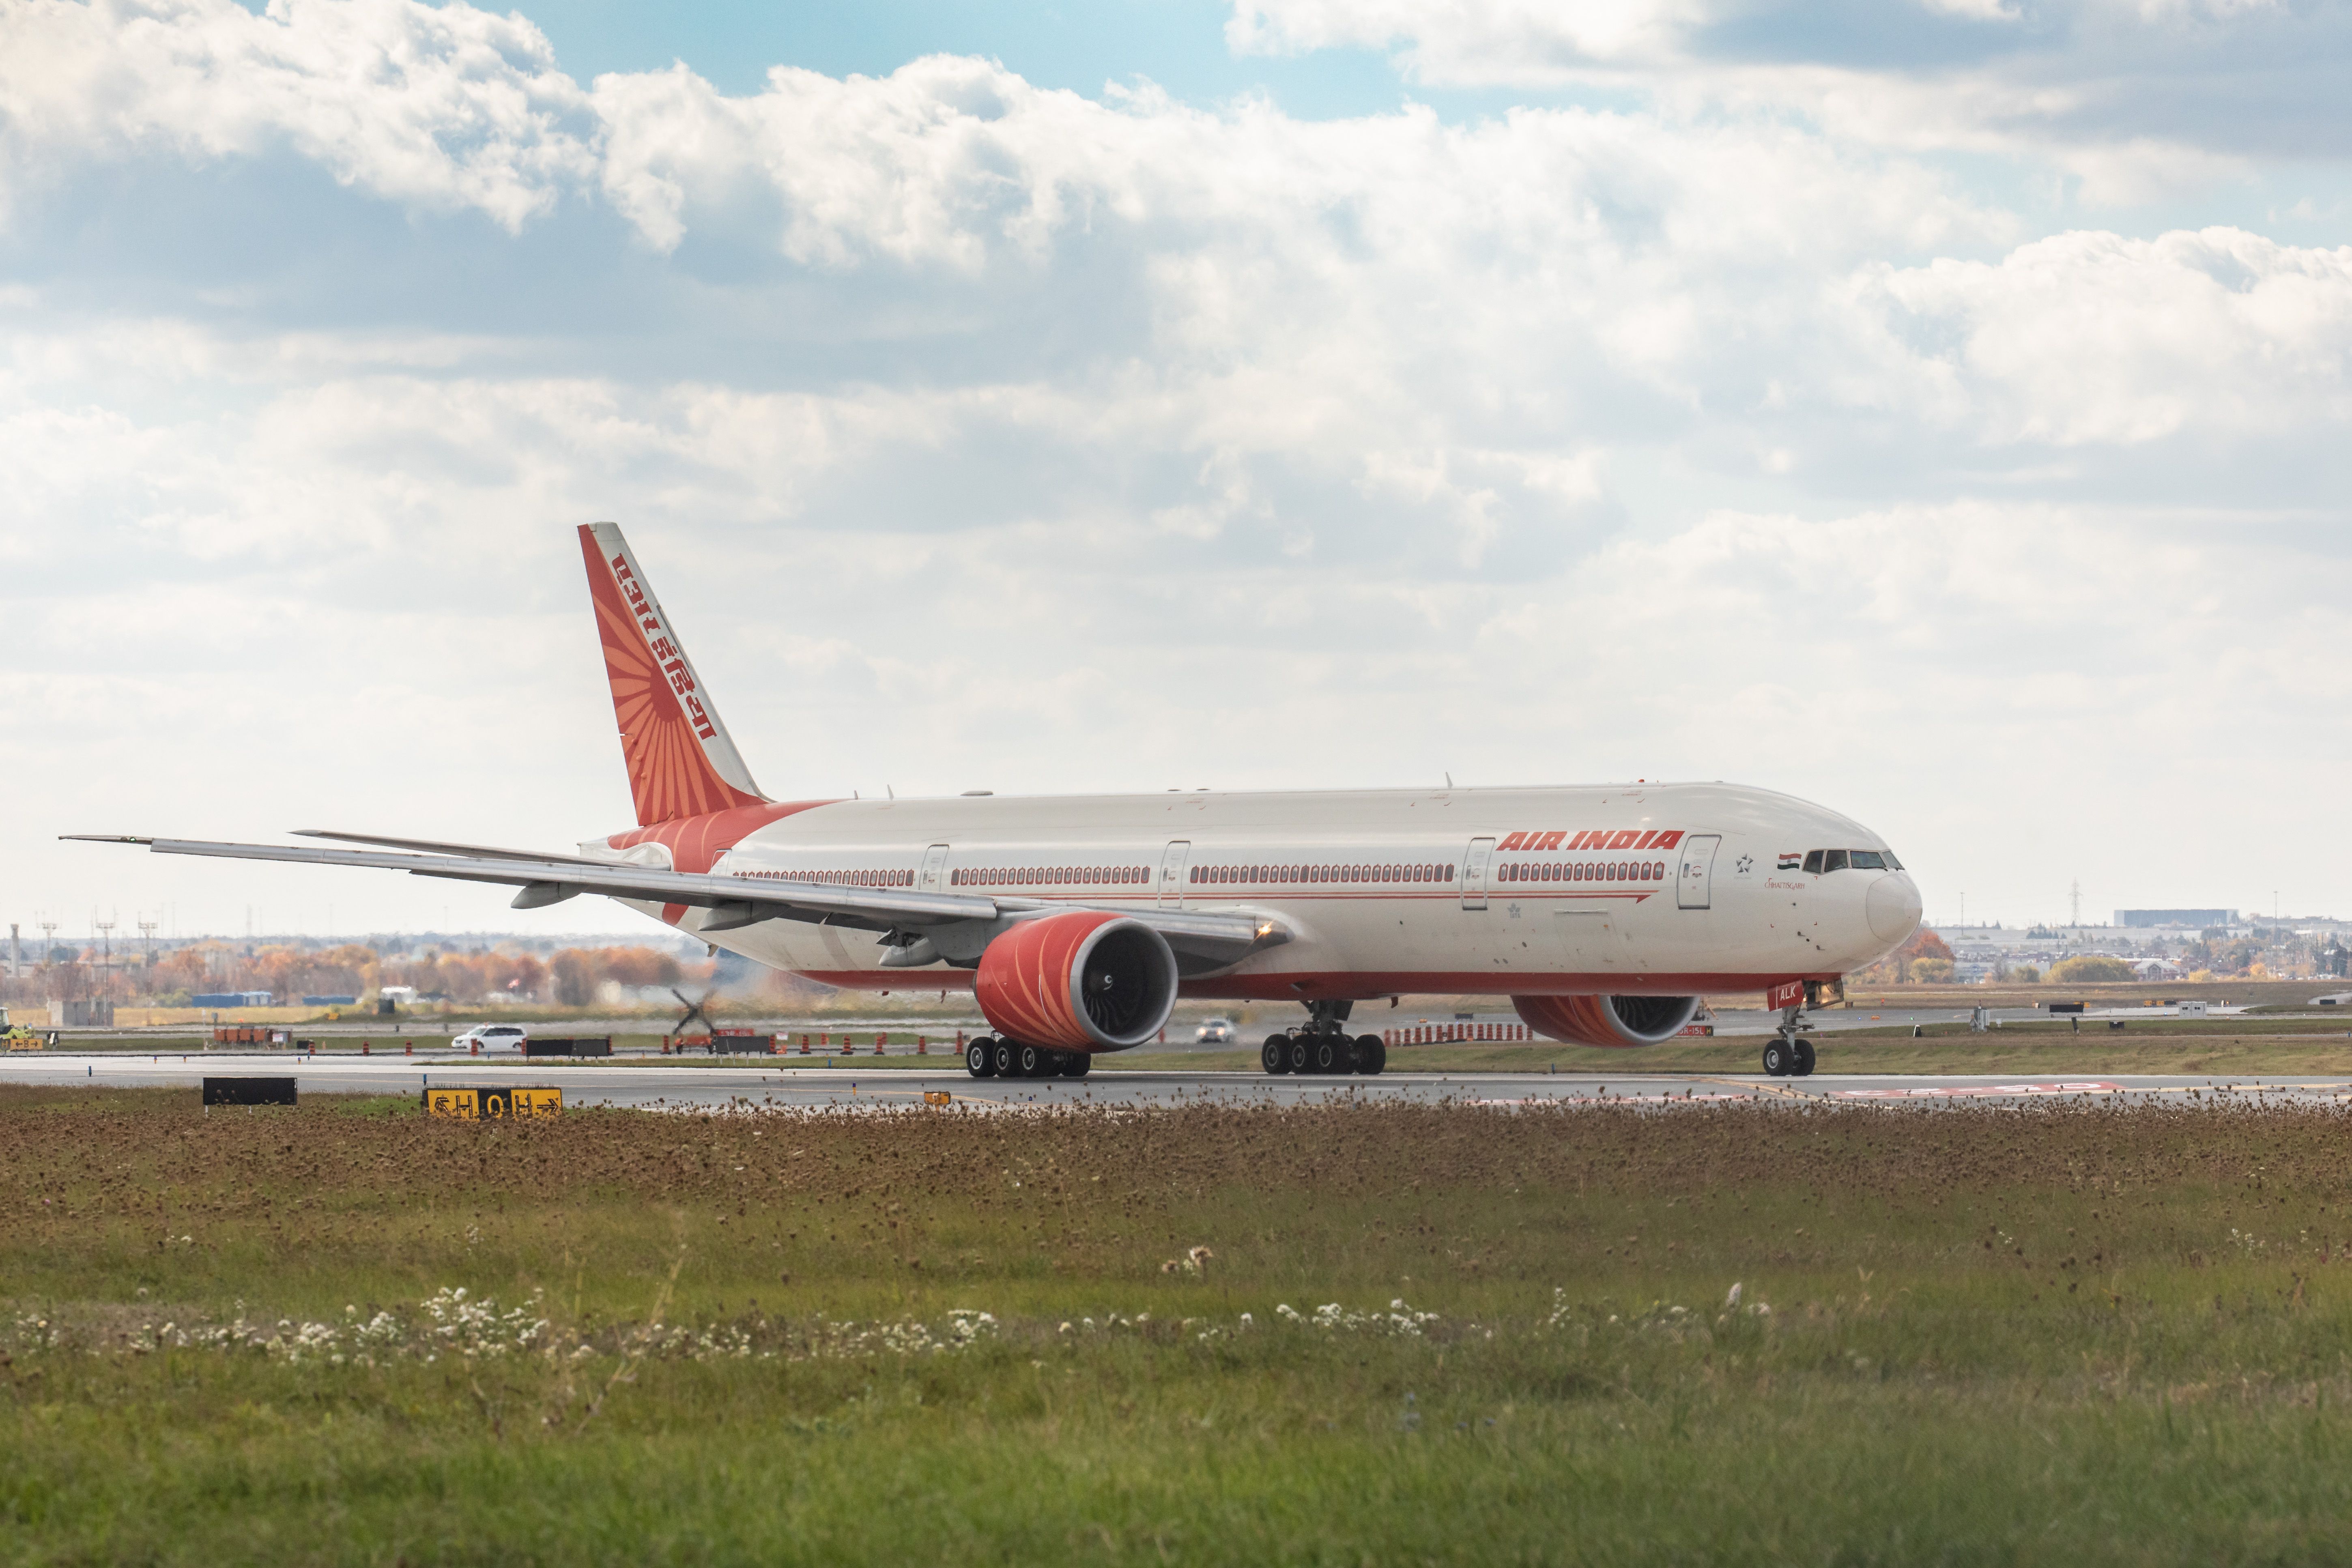 An Air India Boeing 777 getting ready to take off at Toronto Pearson Airport.